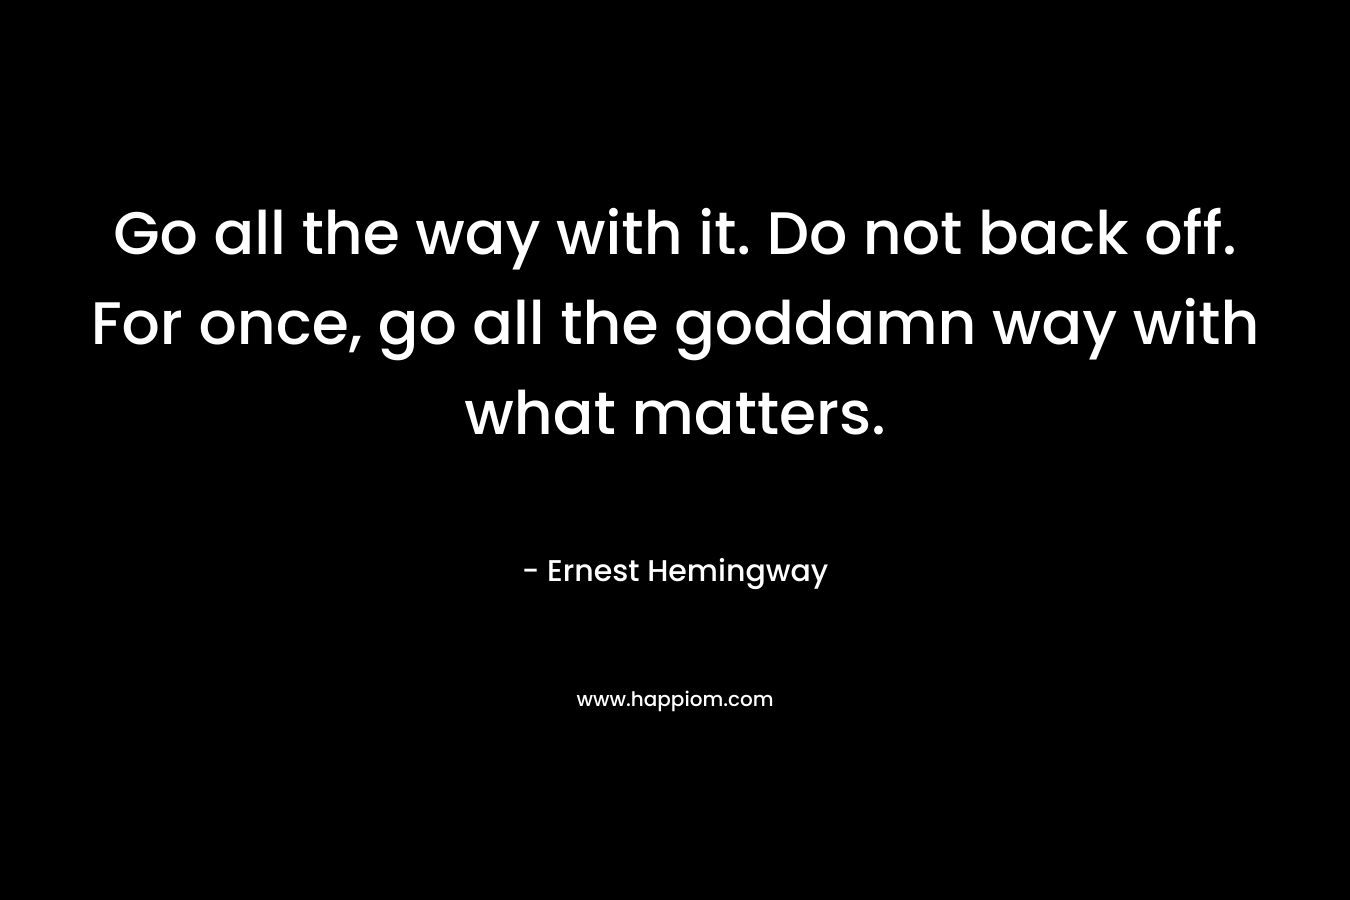 Go all the way with it. Do not back off. For once, go all the goddamn way with what matters. – Ernest Hemingway